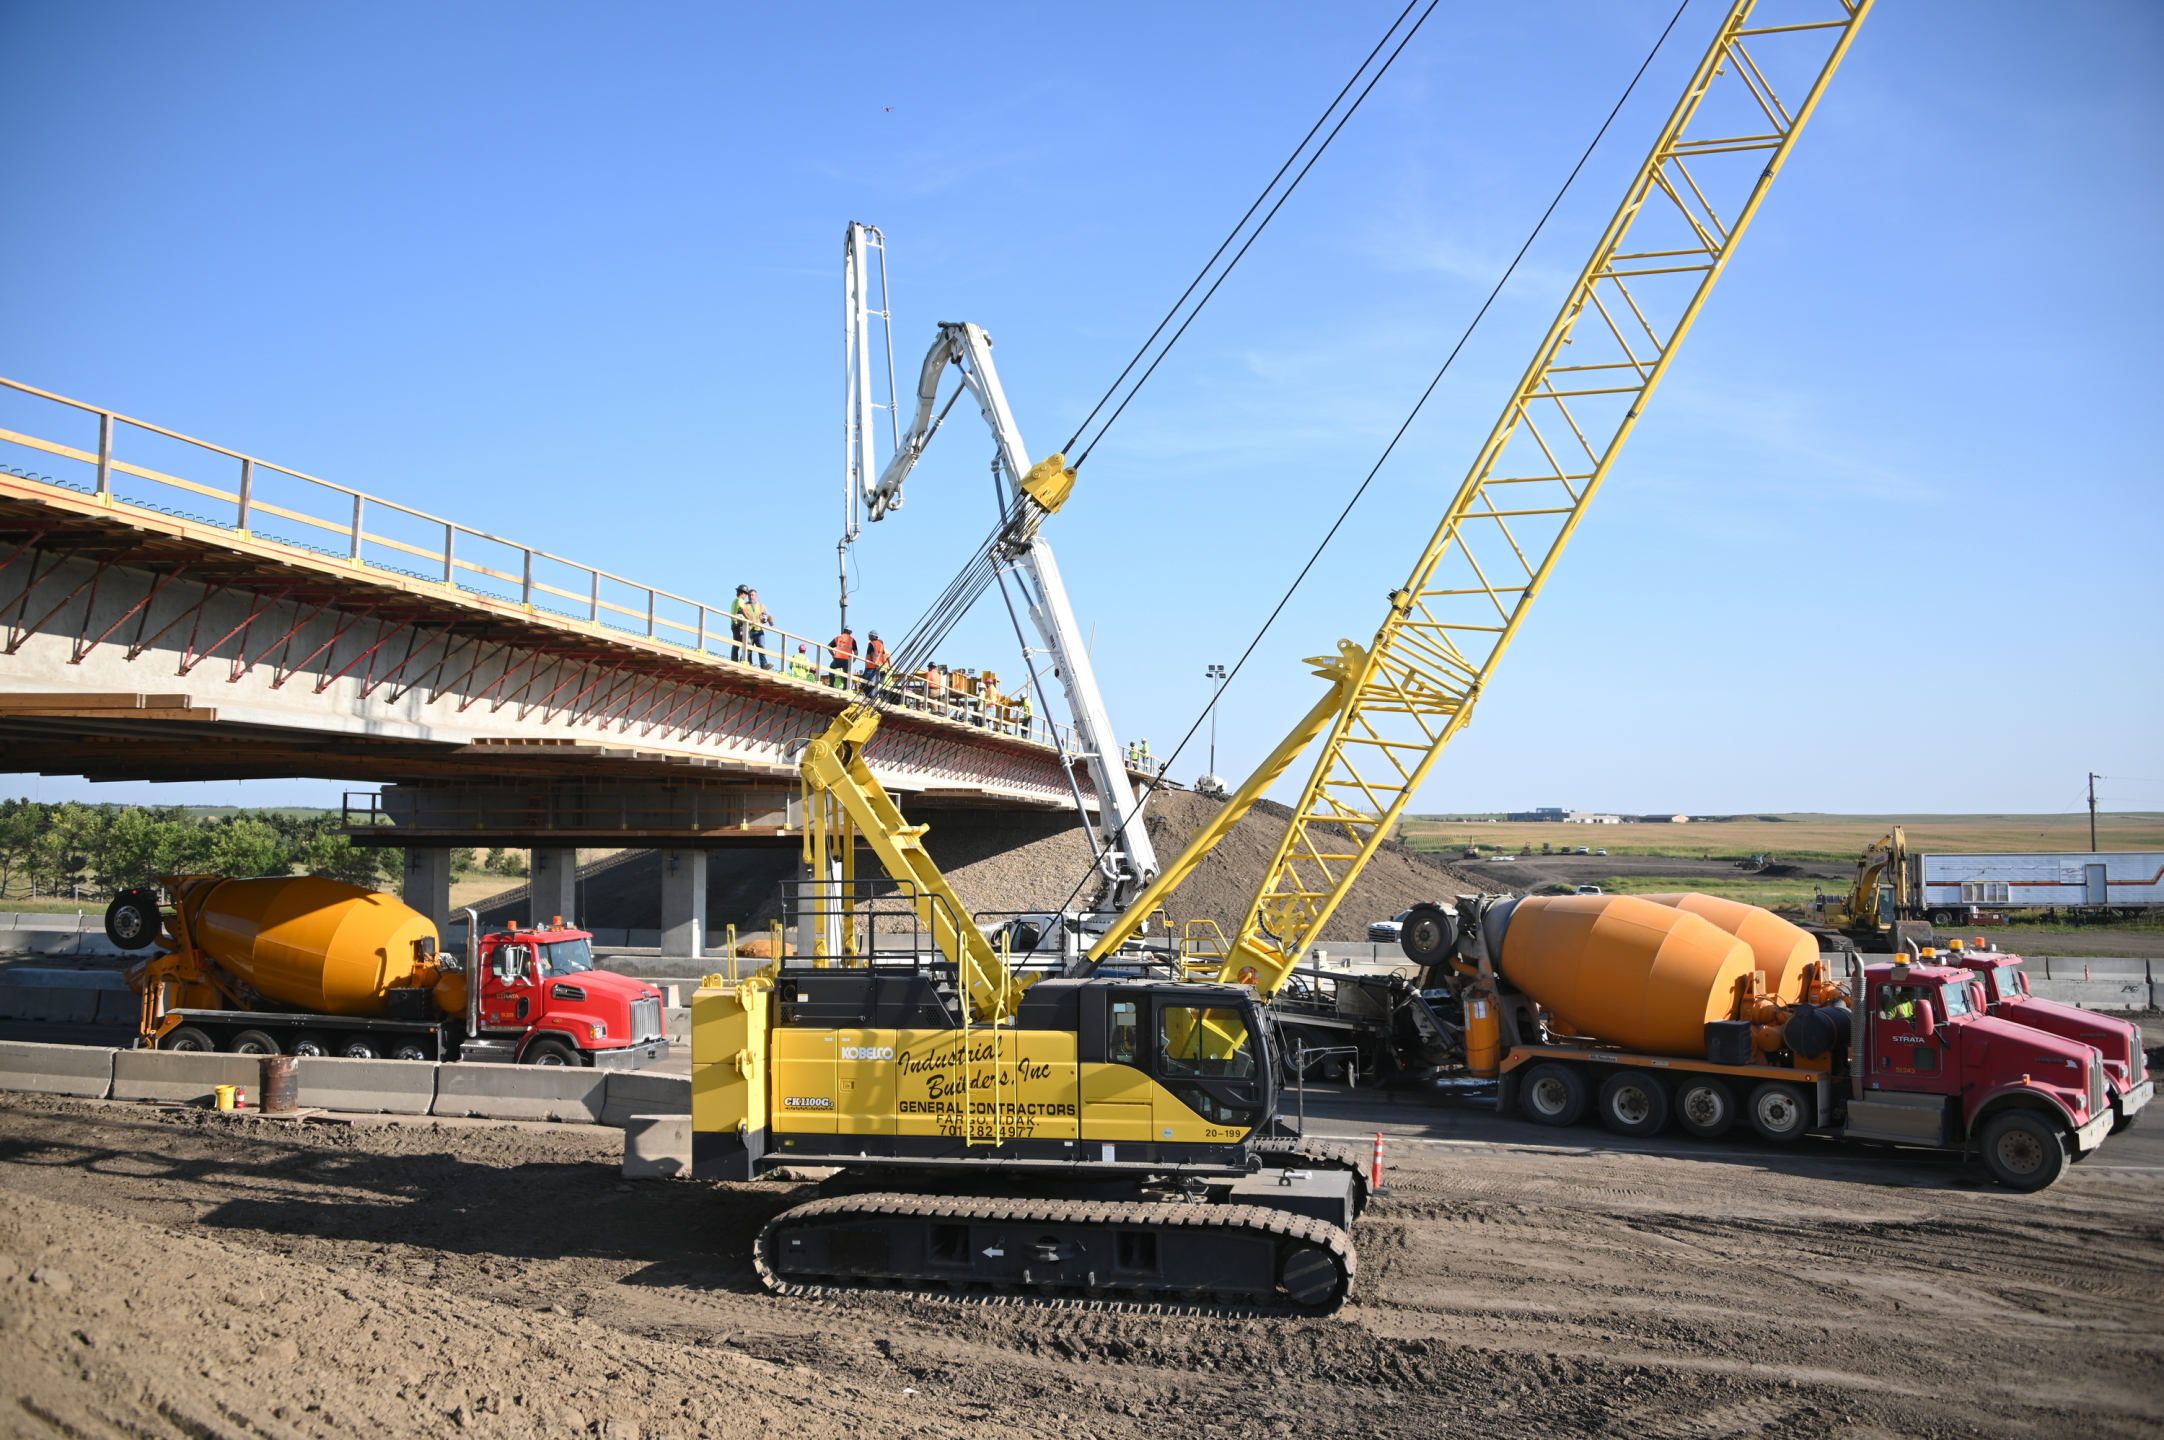 Crane and heavy equipment at a construction site